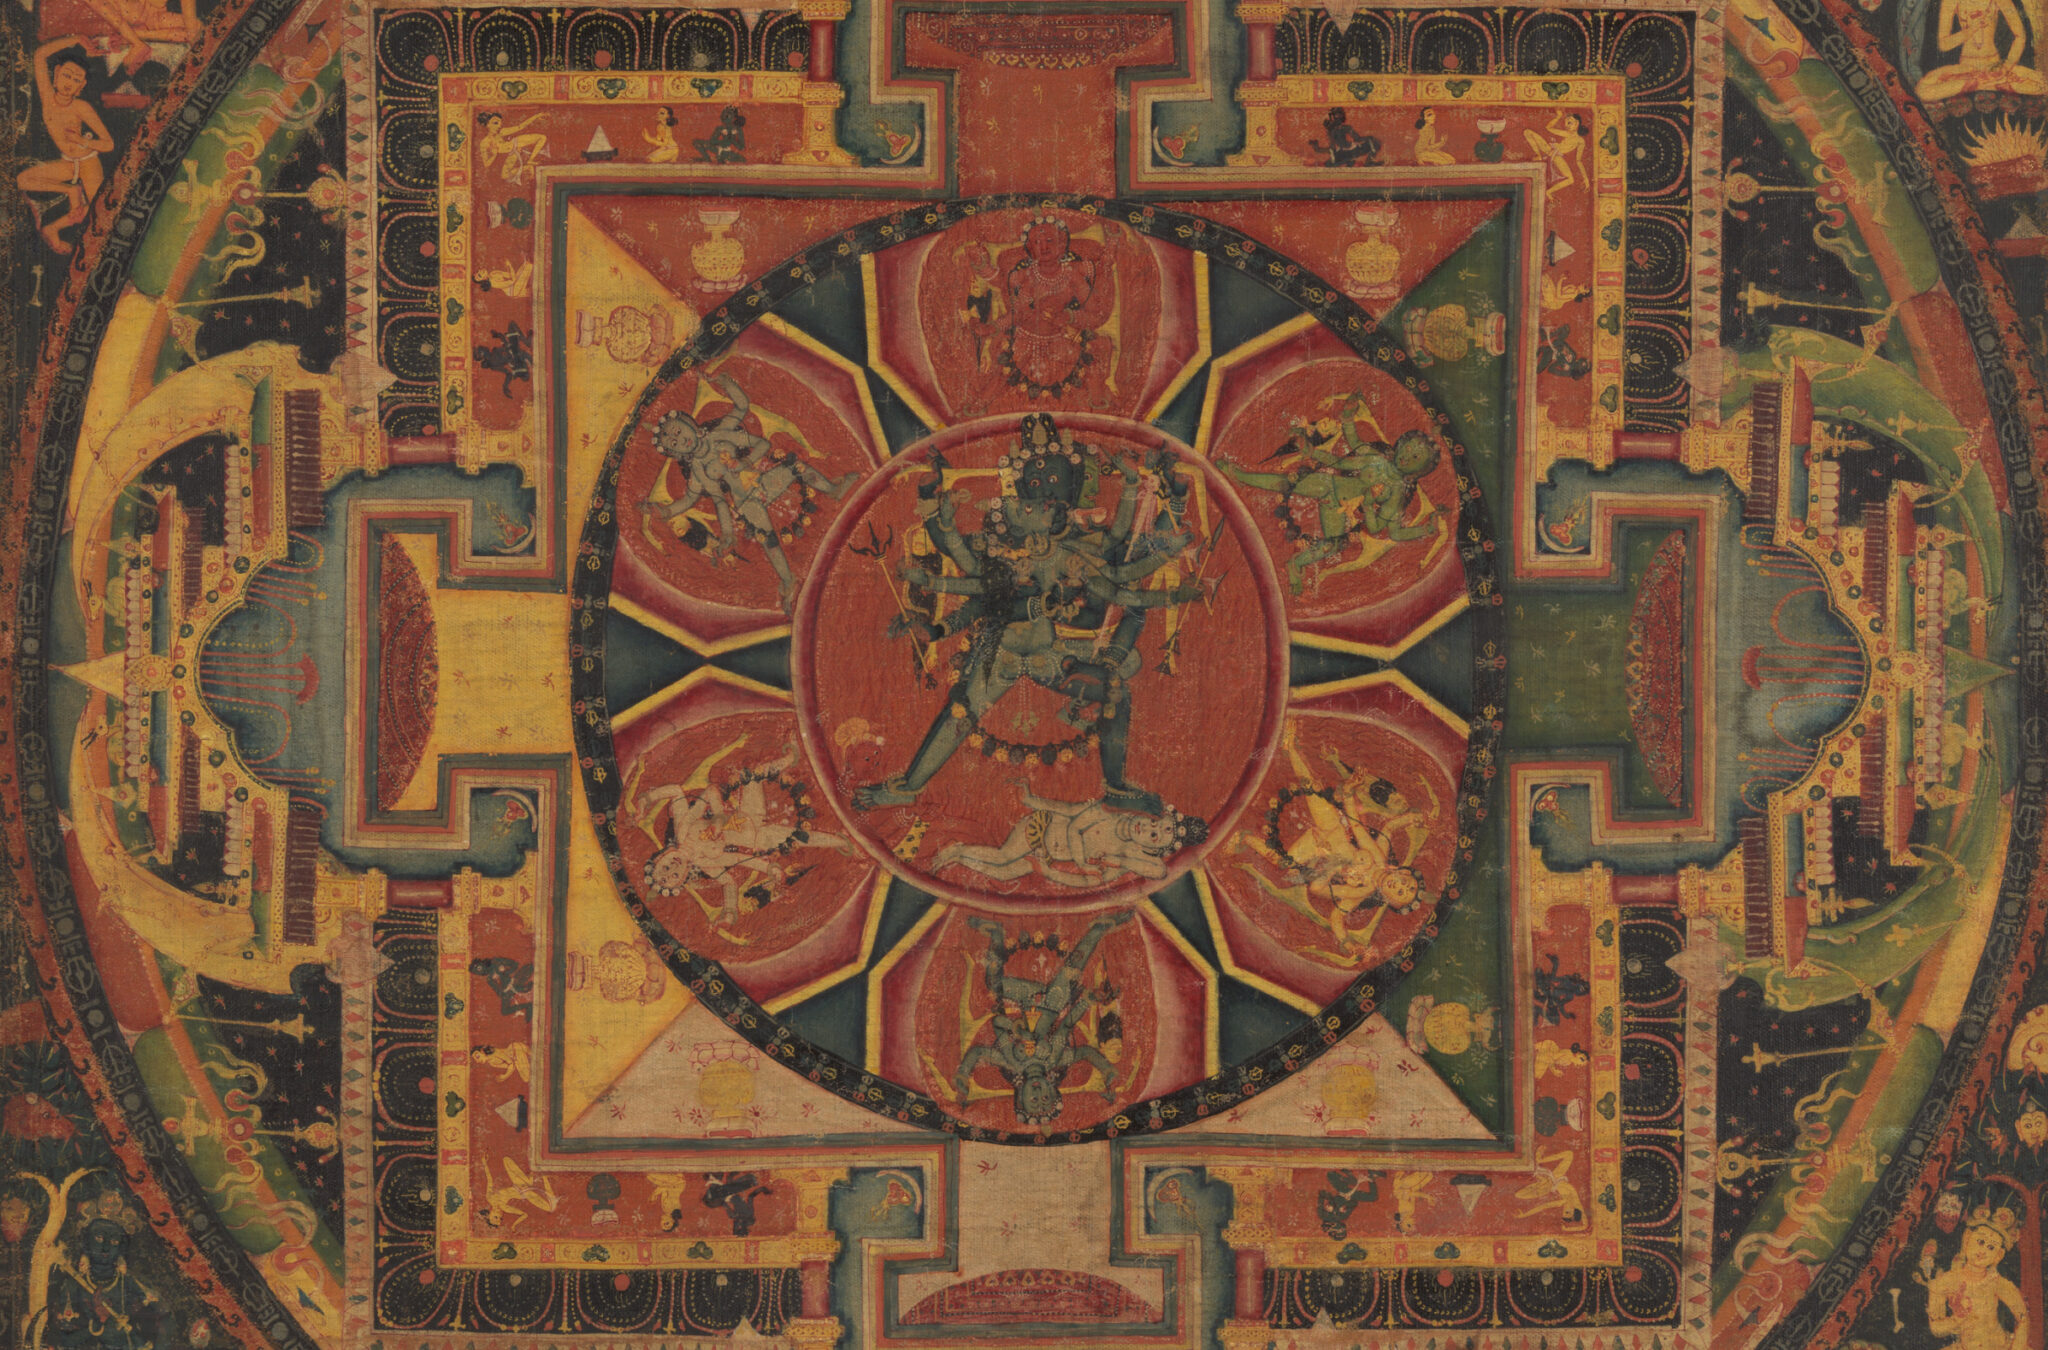 Blue-skinned deity stands in center of geometric arrangement of circles and squares featuring architectural forms at cardinal points